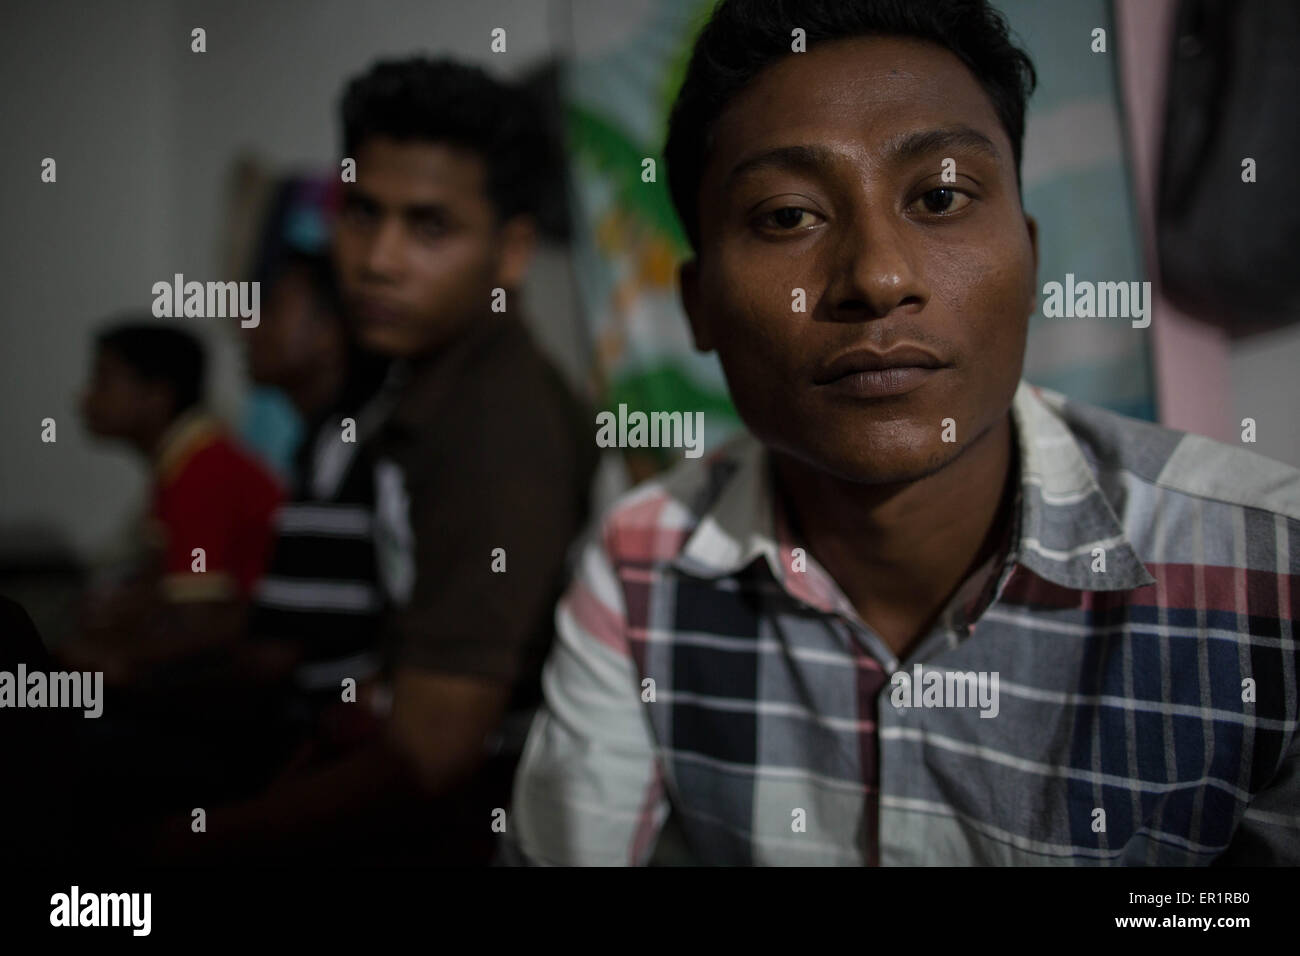 Langkawi, Malaysia. 20th May, 2015. Rohingya men gathered inside an abandoned building, after their end of work day.Sabri Halam (right), he's 20 years old and he's the brother of Mohamad Robil Alam.In Kuah district, not too far from the touristic area of Langkawi Island, and close from the airport.9 Rohingyas men aged between 15 and 26 years old, share a flat inside an abandoned building owned by their employer which they work for.After fleeing their own country (Myanmar) ''helped'' by smugglers usually from Thailand, and spending for some of them more than 10 months traveling by boat, or Stock Photo